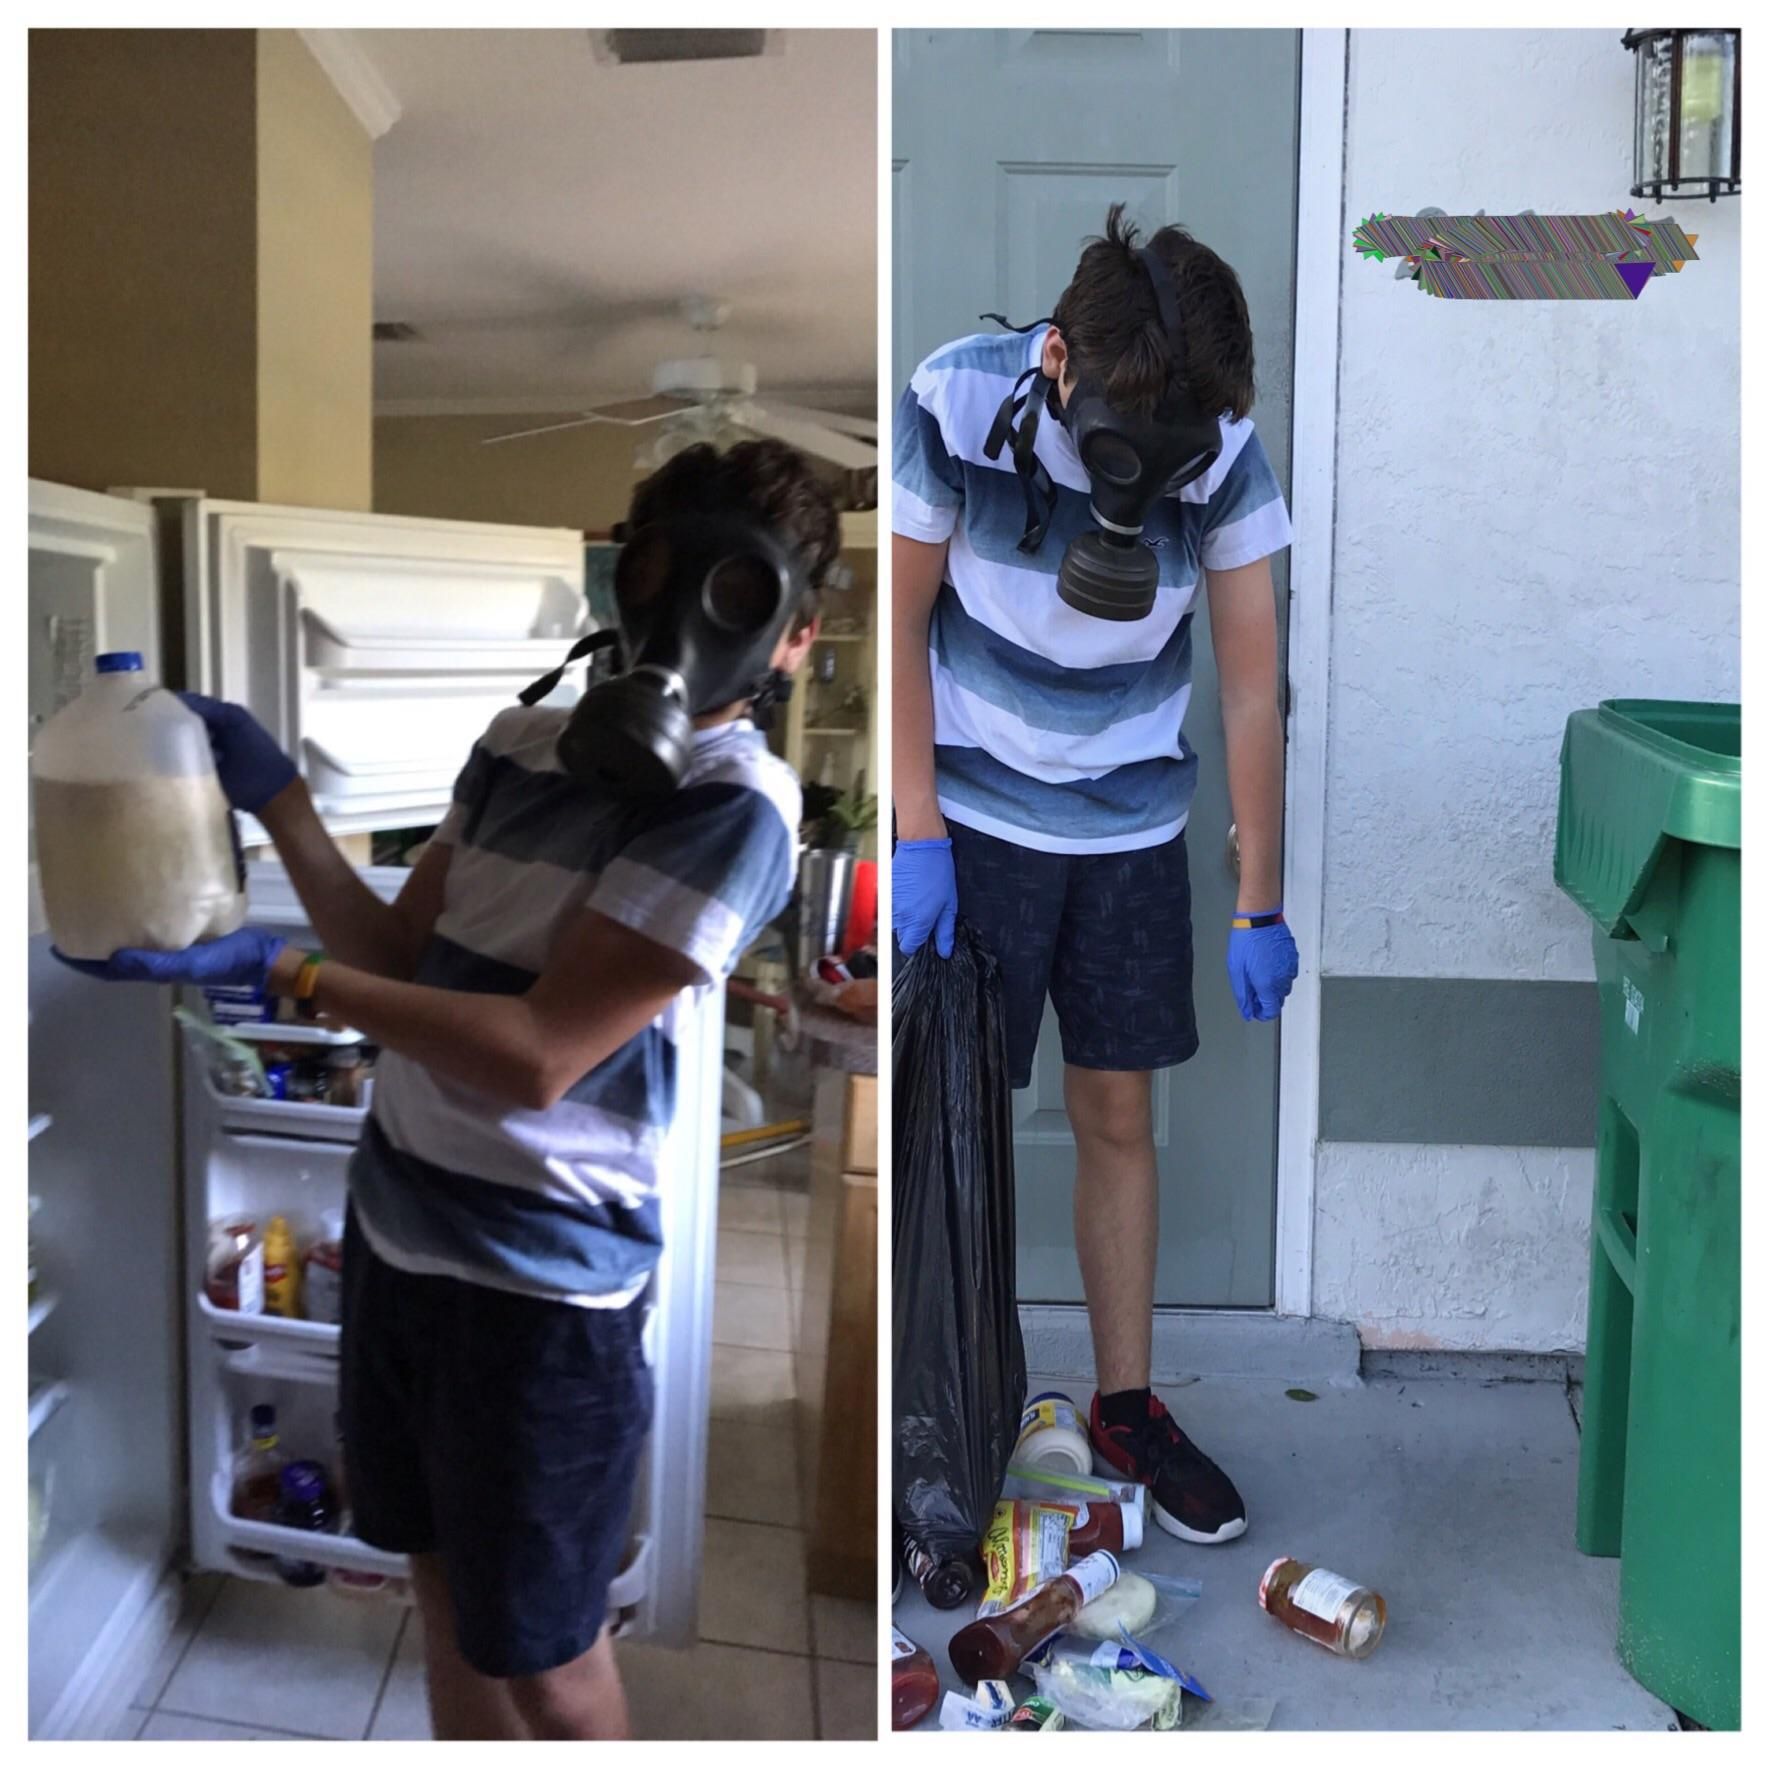 My brother cleaning the fridge after the 4th day of no power